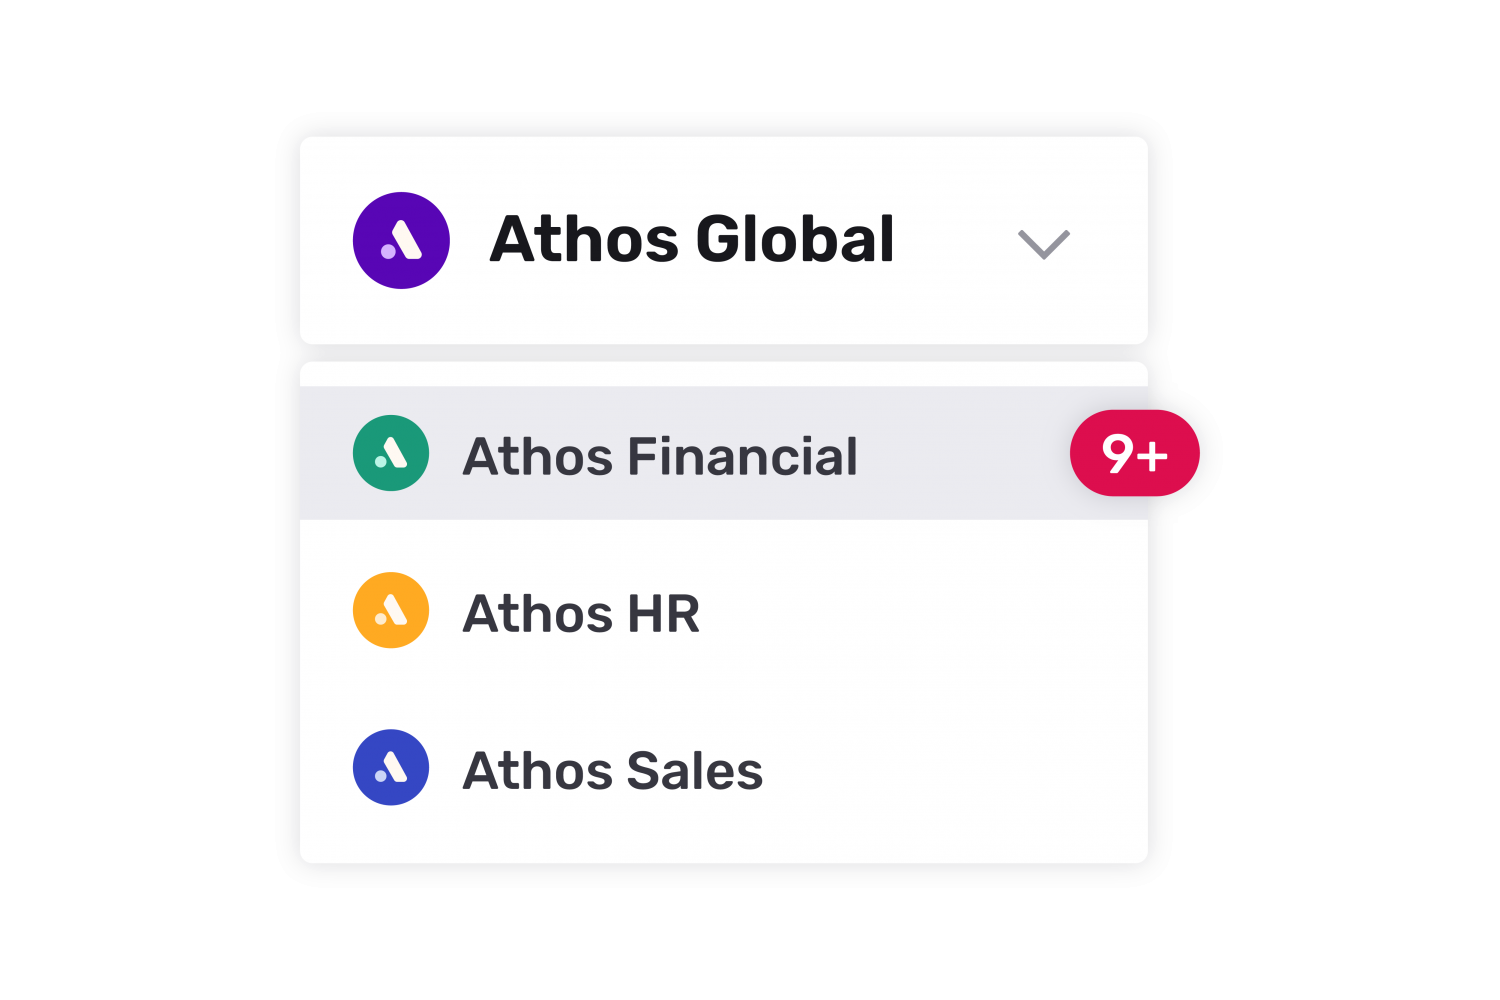 Different organizational Cerkls are shown including Athos Global, Athos FInancial, Athos HR, and Athos Sales